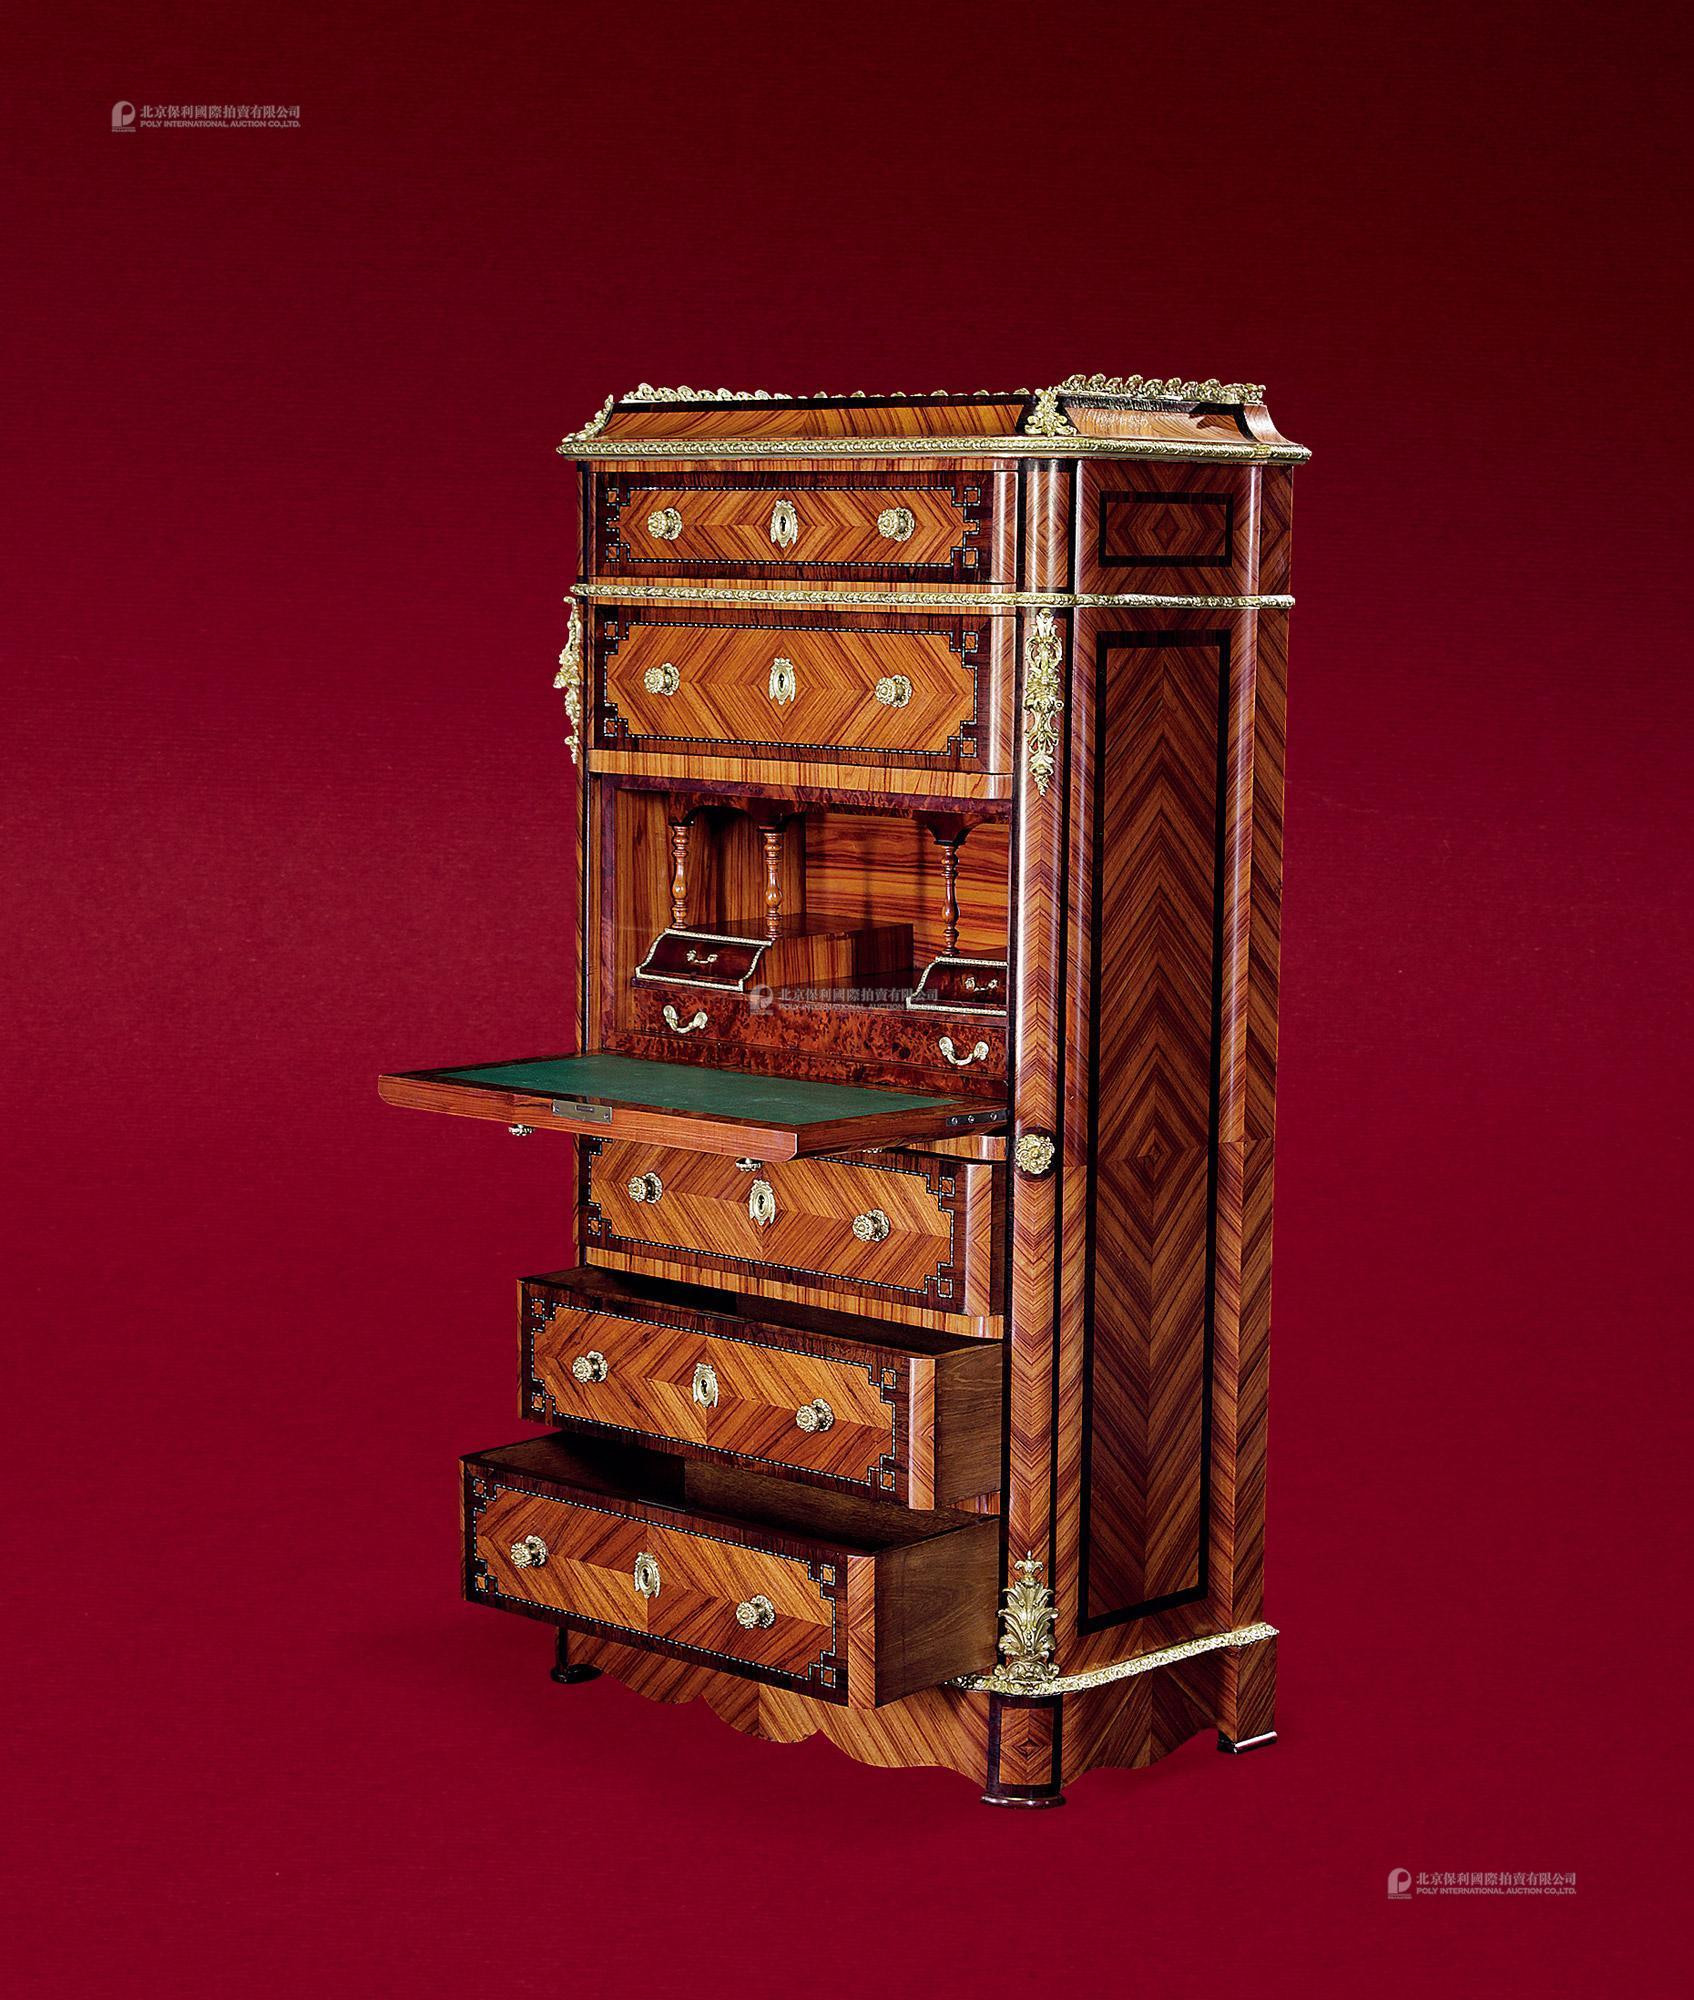 A FRENCH LOUIS XIV STYLE MARQUETRY SECRETARY DESK